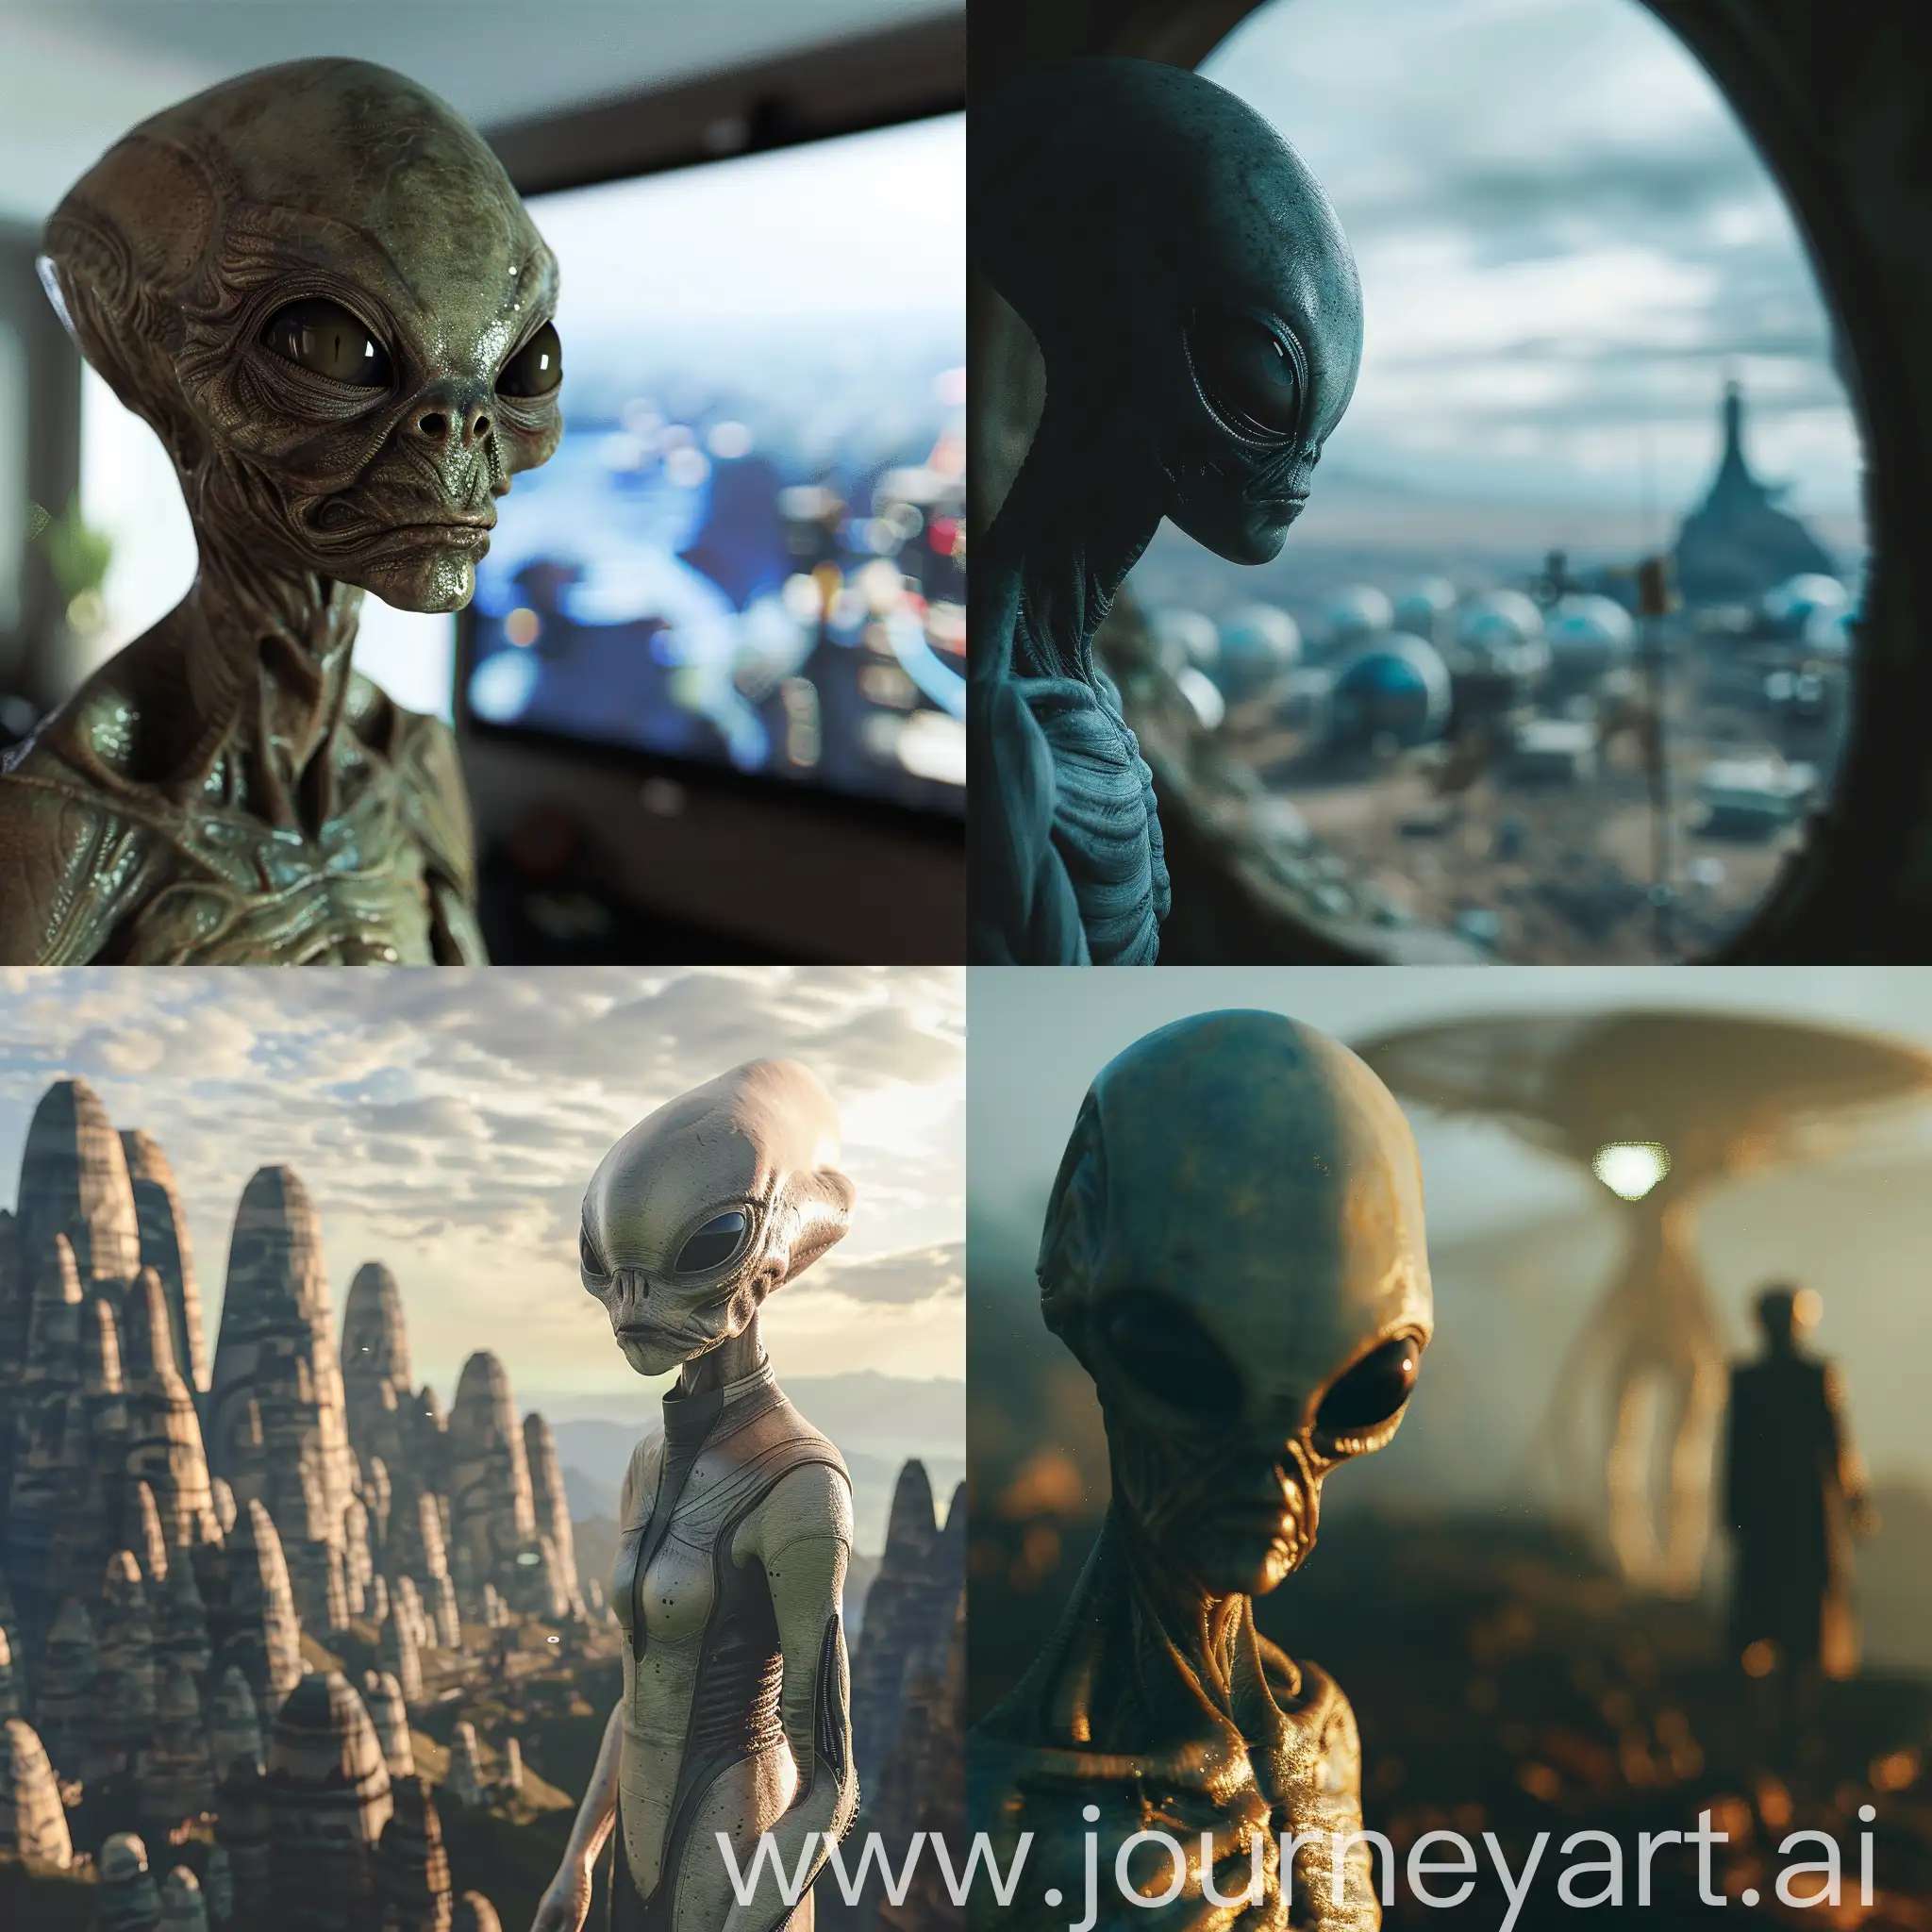 Extraterrestrial-Observer-Gazing-at-Earth-in-Cinematic-UltraRealistic-Scene